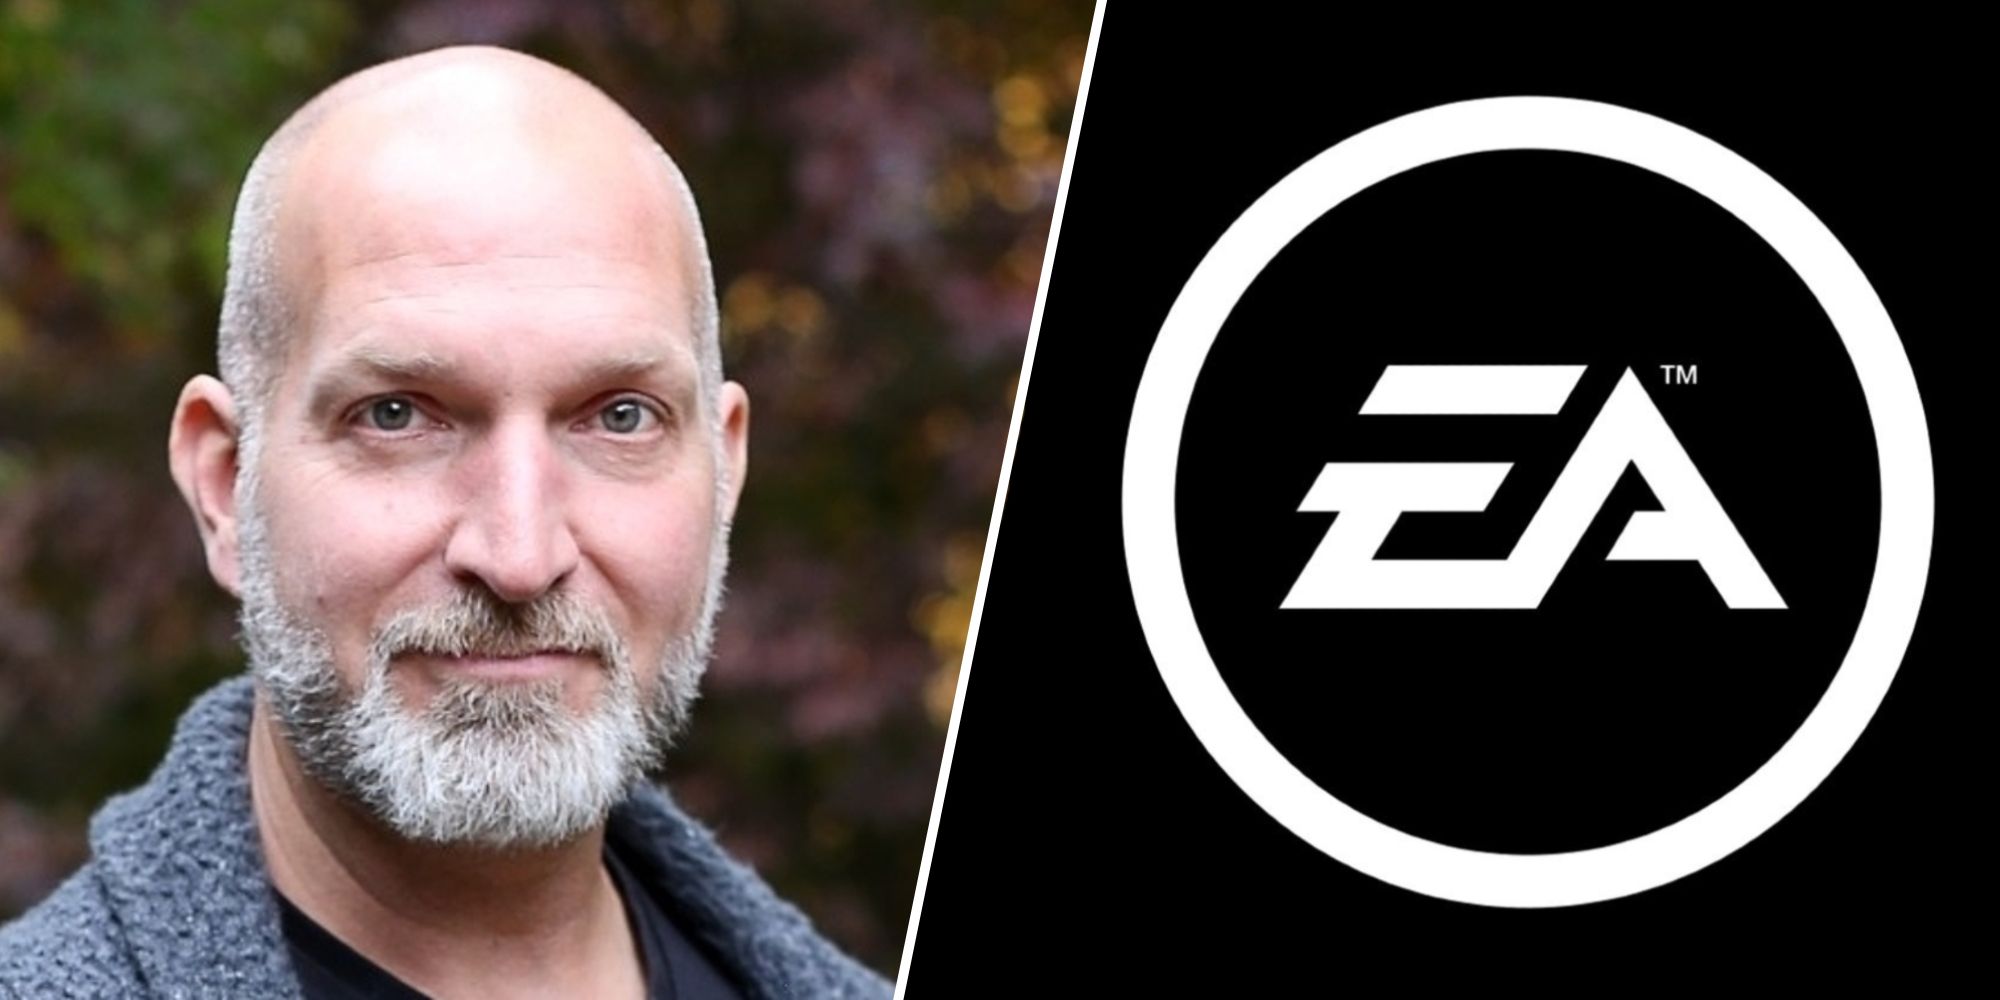 Two images: On the left is Halo co-creator Marcus Lehto, on the right is an EA logo